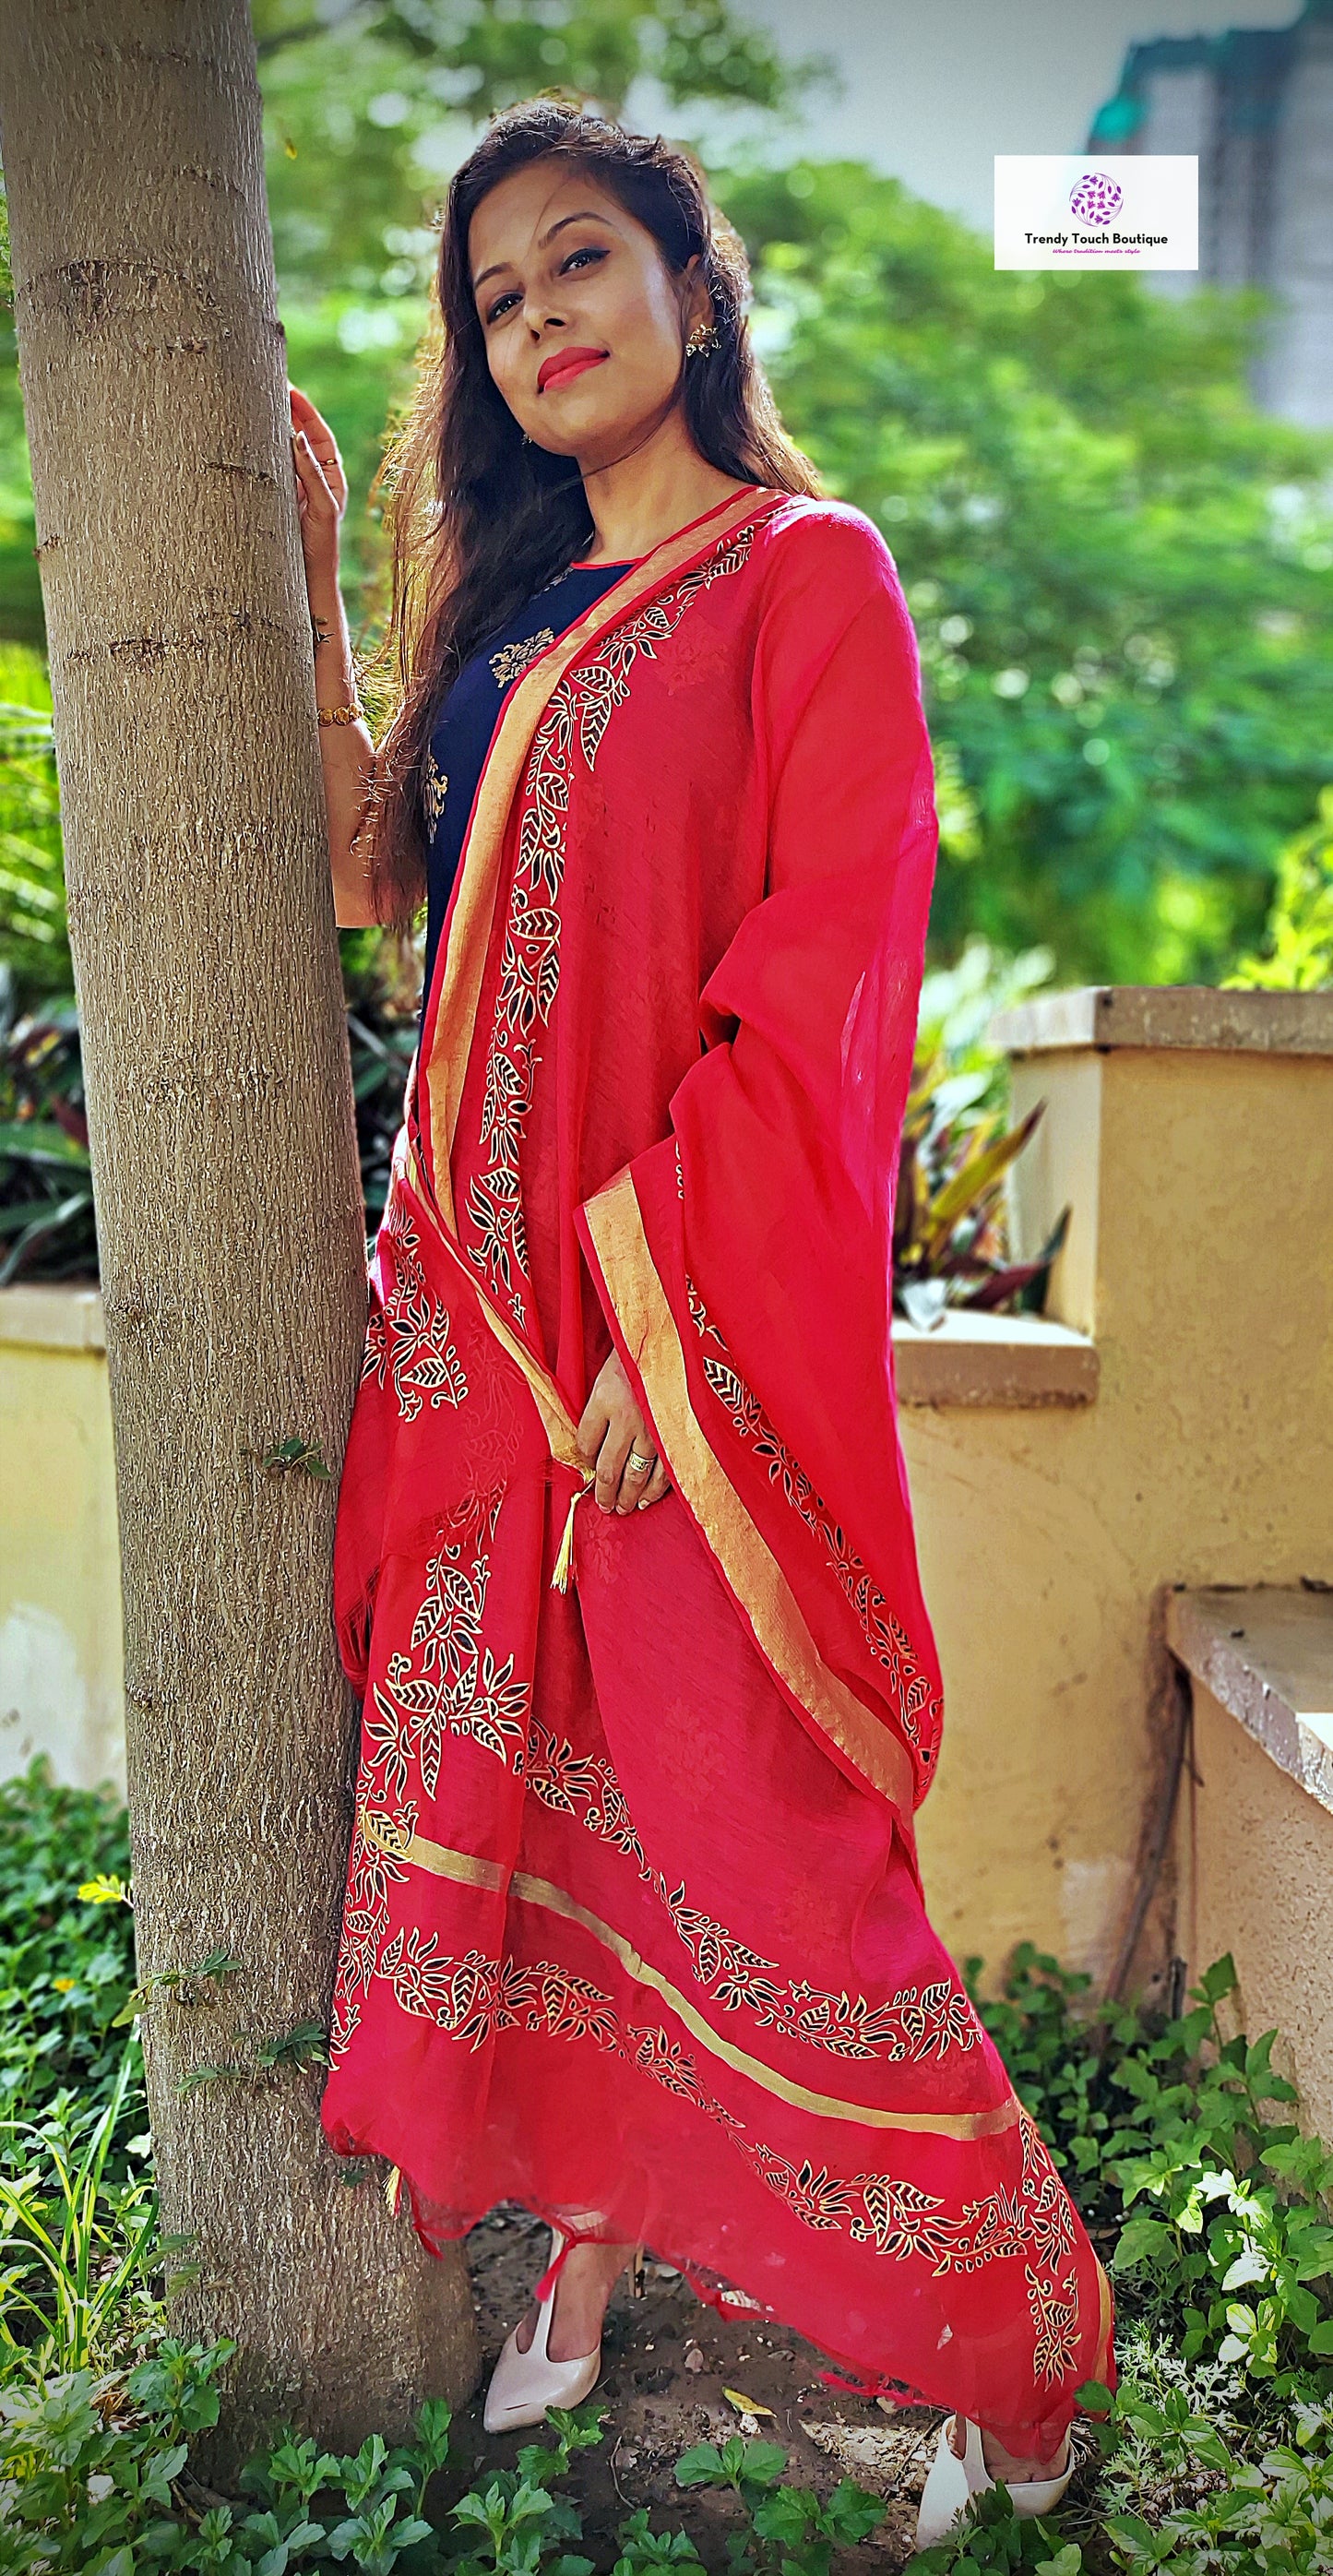 I LOVE PINK - HAND-PAINTED - CHANDERI SILK COTTON - MADE TO ORDER